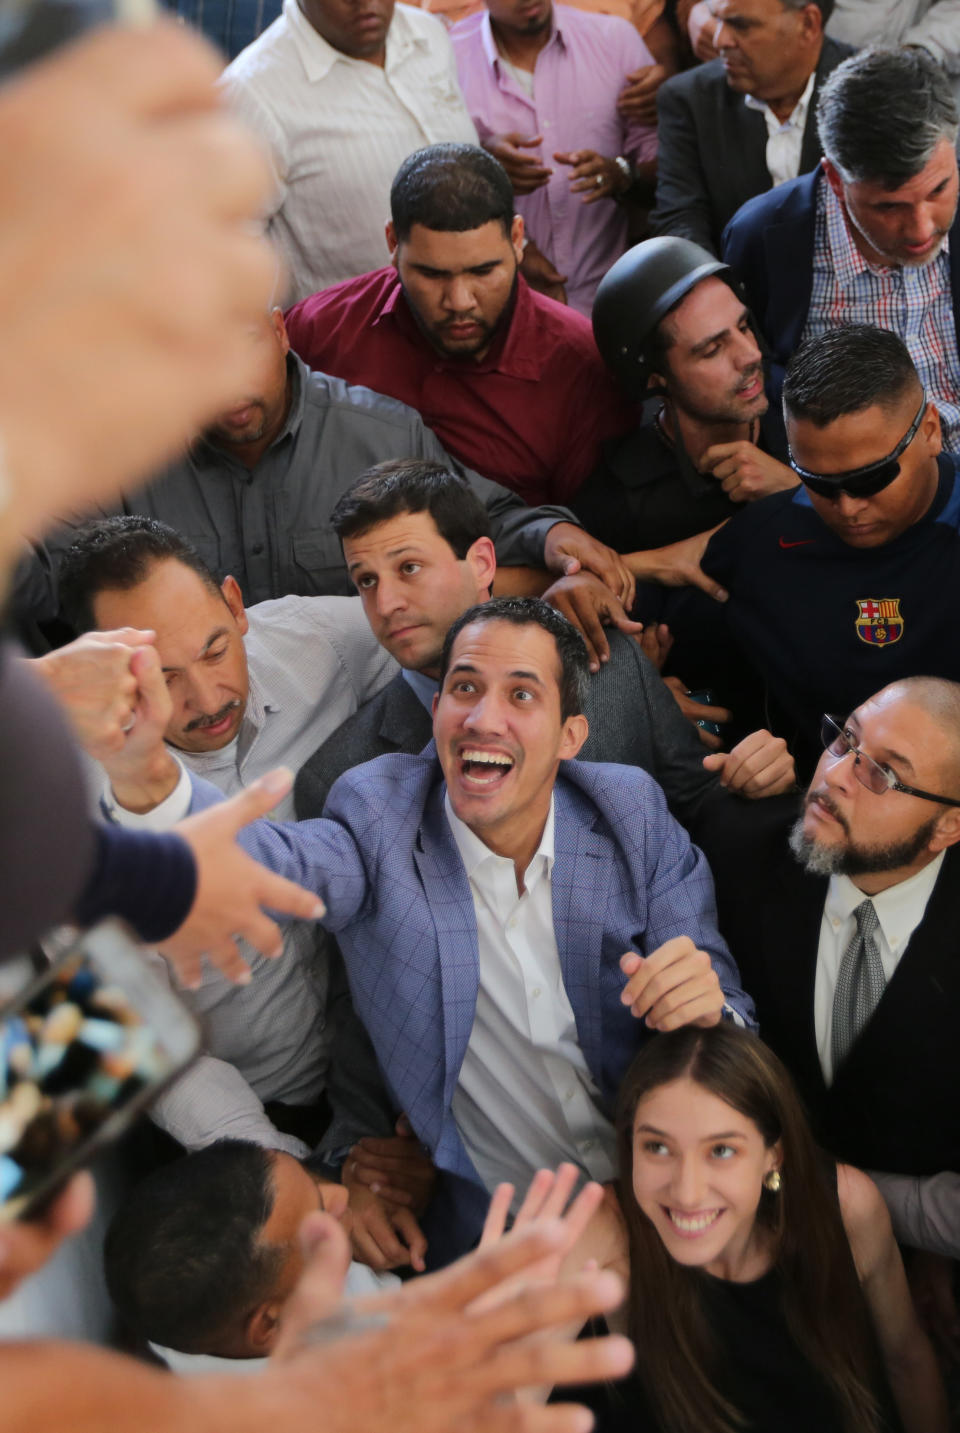 Venezuelan National Assembly President Juan Guaid&oacute; greets supporters in the Hatillo municipality of Caracas, Venezuela, on March 14, 2019. Guaid&oacute; has declared himself interim president and demands new elections, arguing that President Nicol&aacute;s Maduro's re-election last year was invalid. (Photo: ASSOCIATED PRESS)